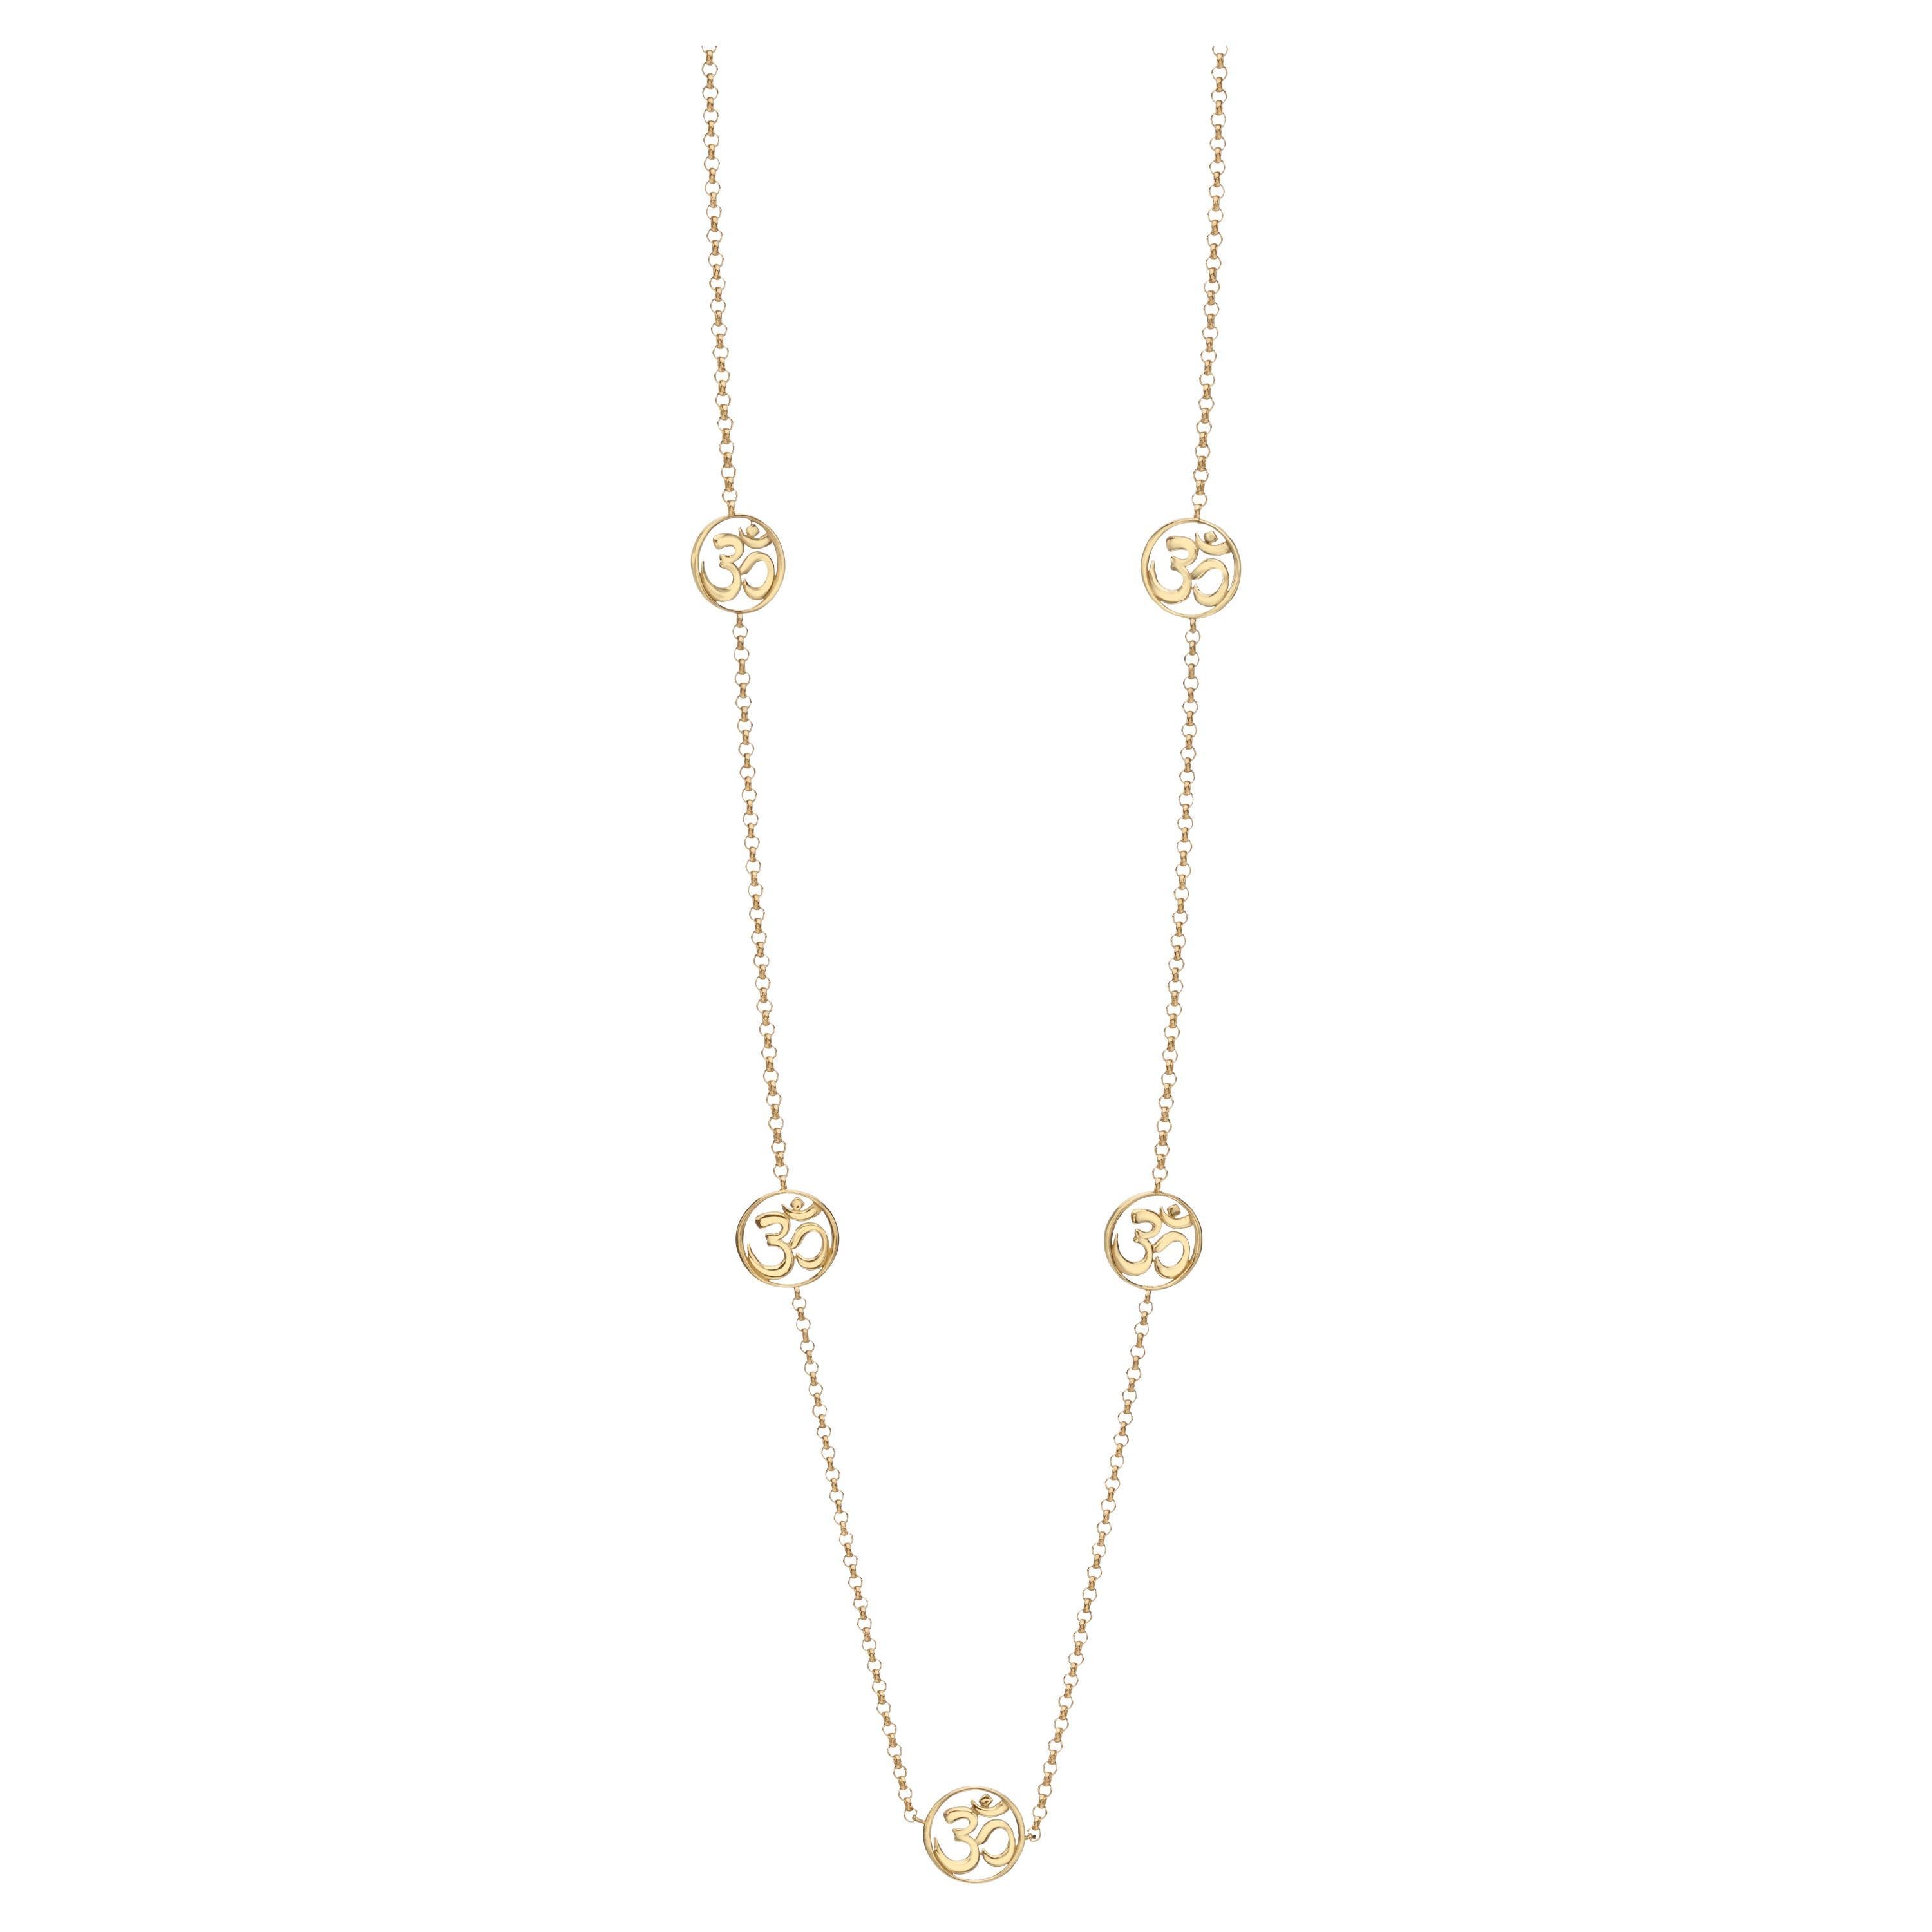 Handcrafted Long Pendant Necklace in 14Kt Gold with the OM Symbol